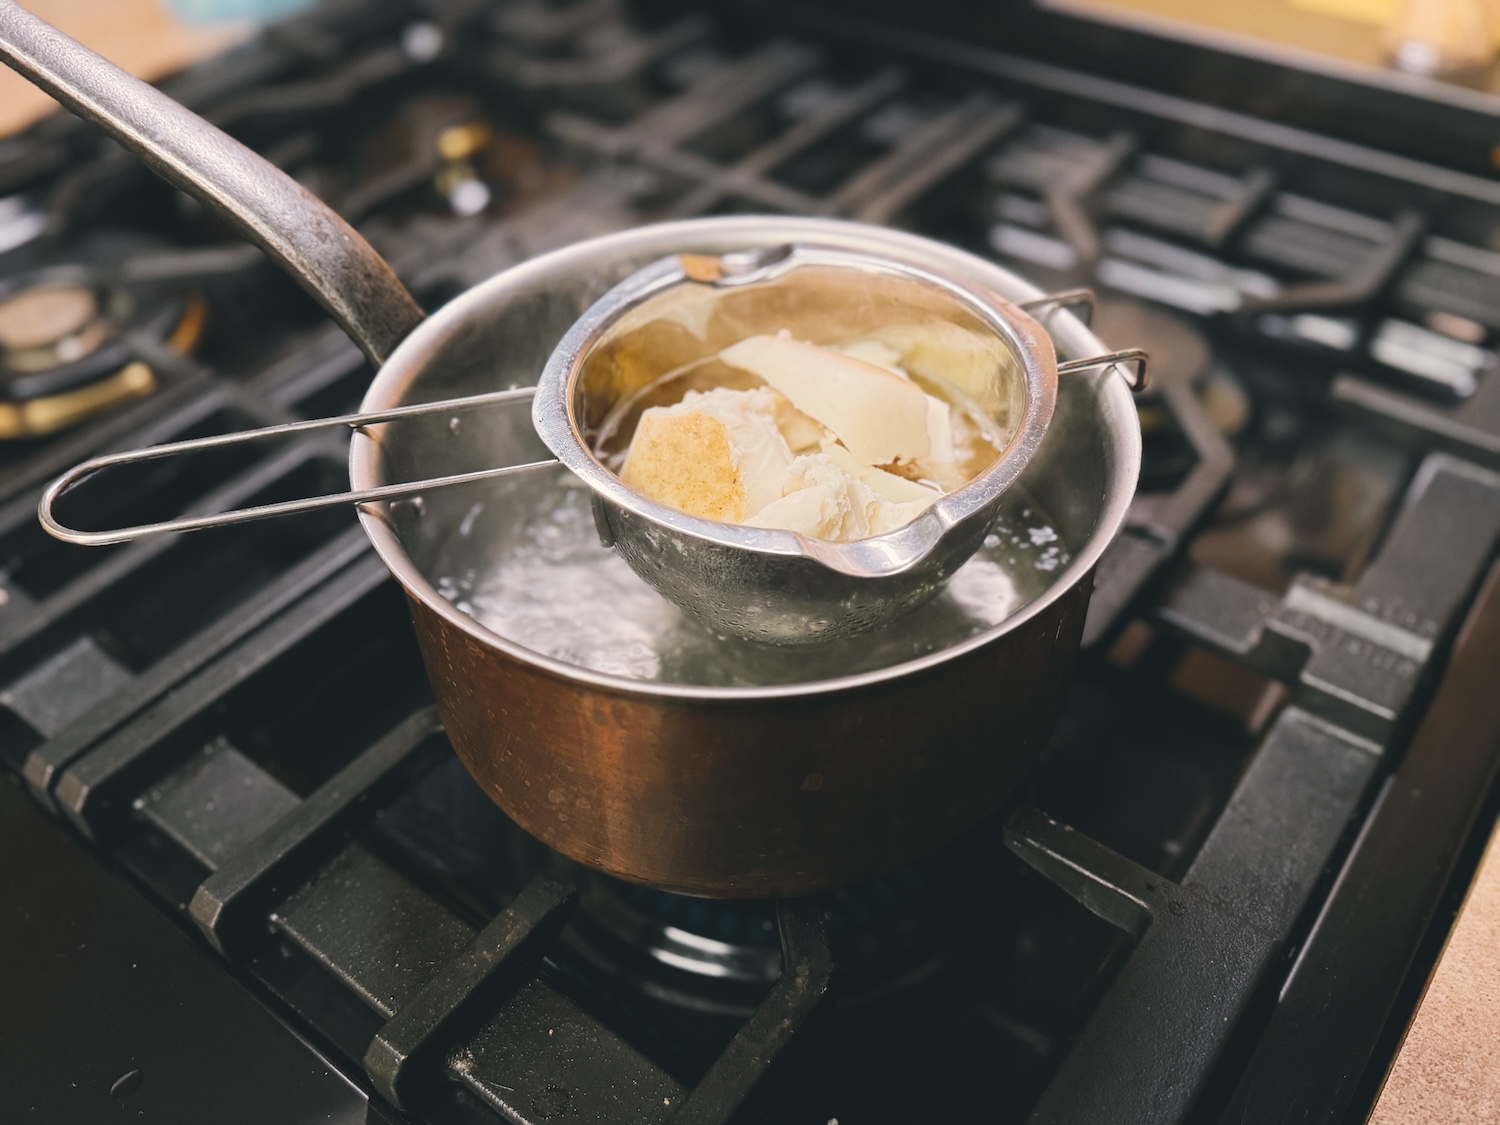 A stainless steel double boiler nestled in a small pot with melting tallow inside.